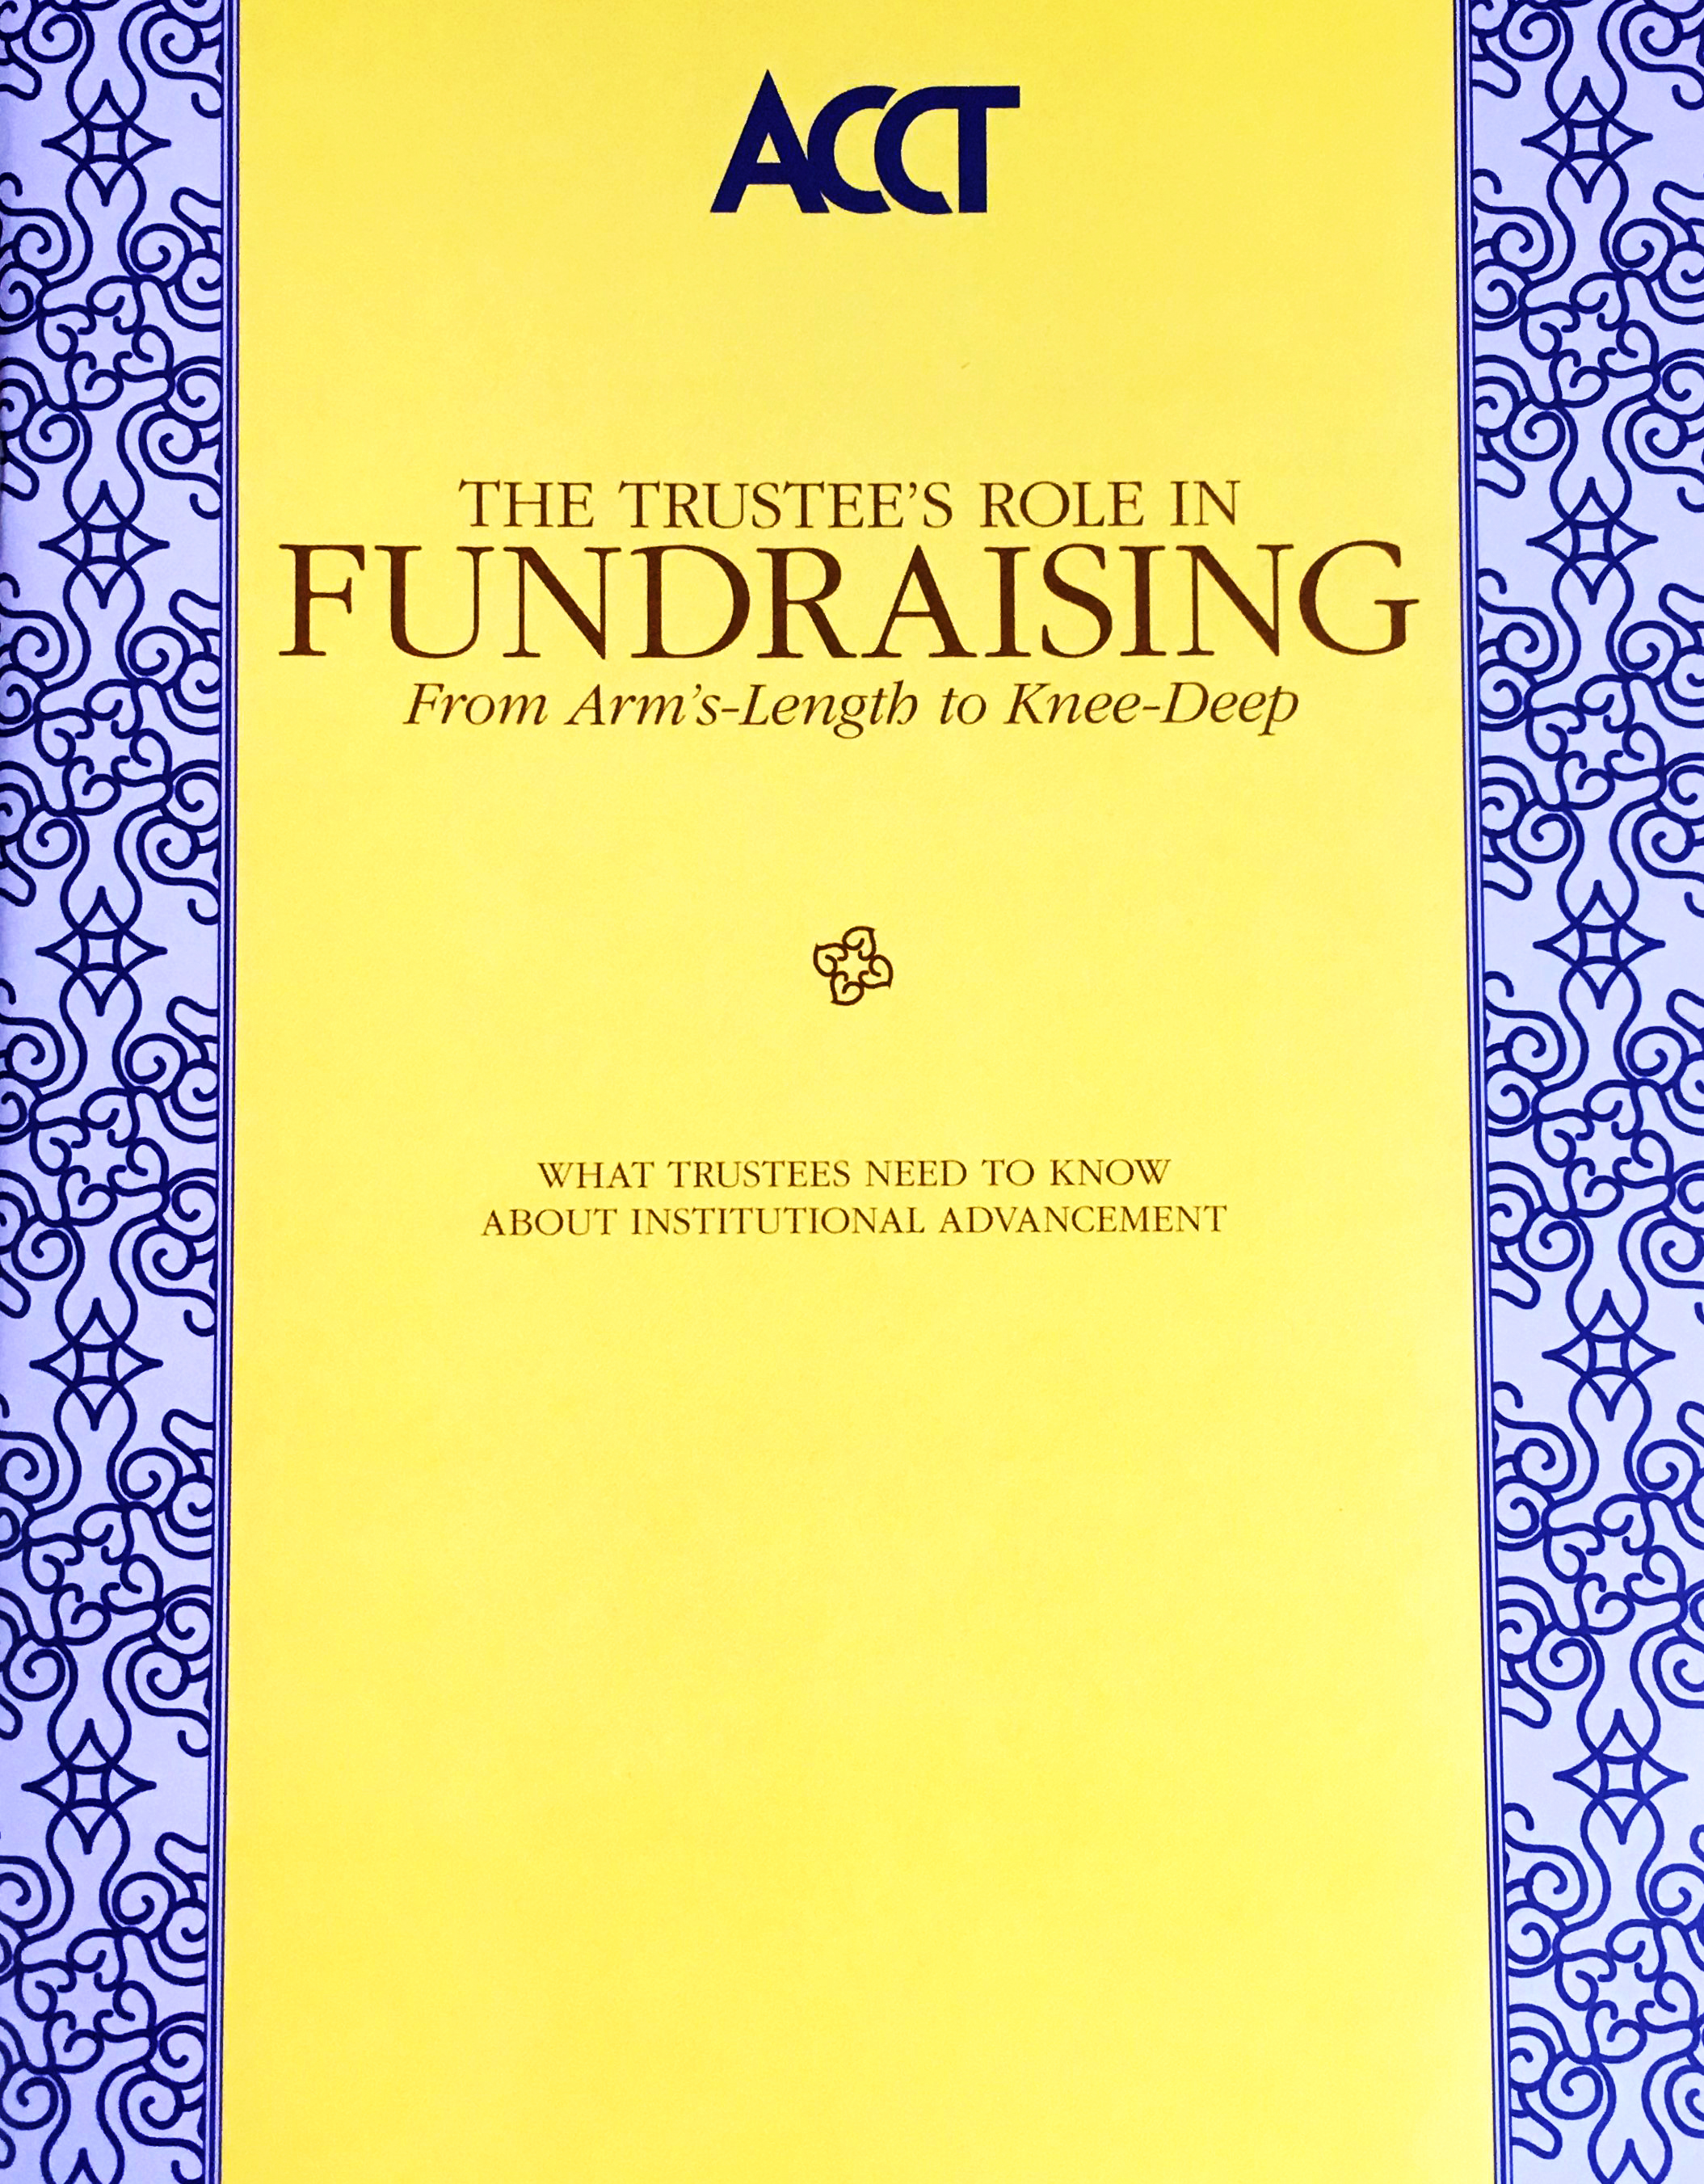 The Trustee's Role in Fundraising